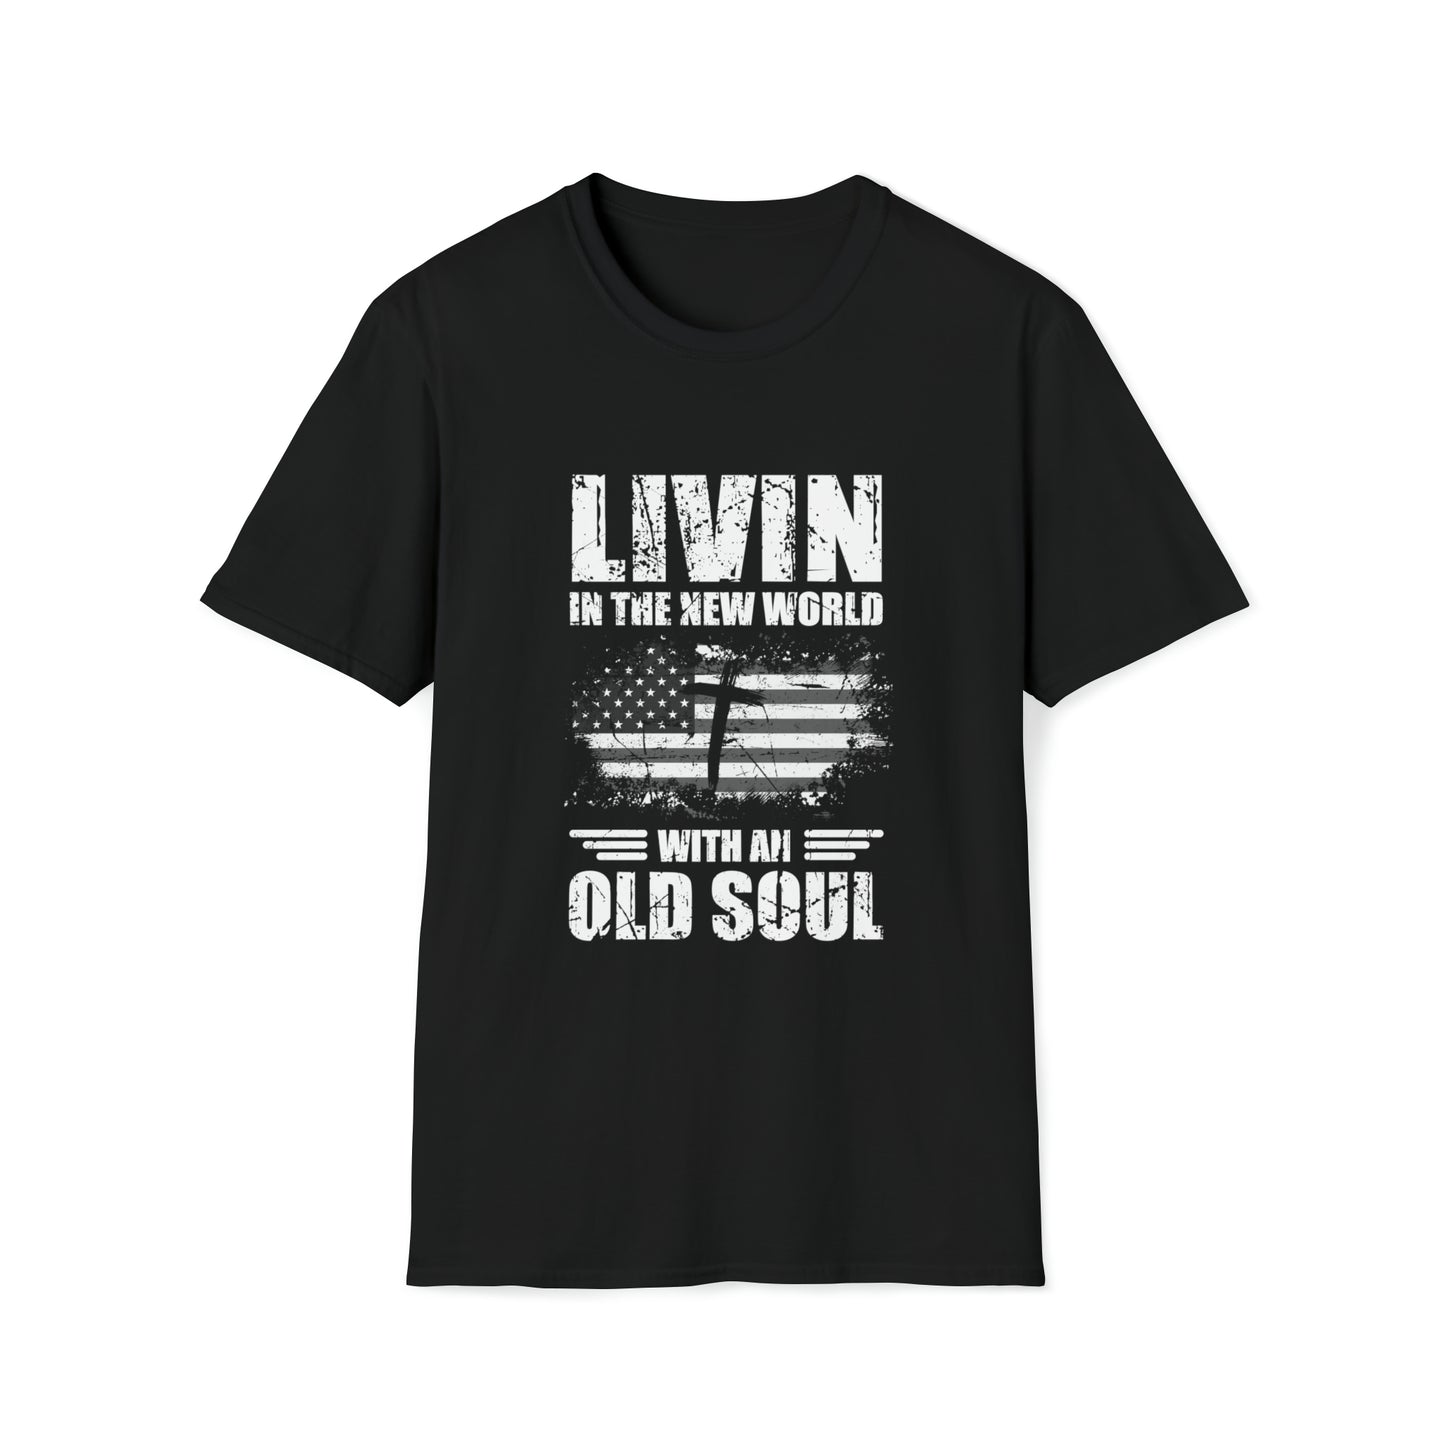 Living in the new world with an old soul shirt, Shirts for blue collar workers, Shirts for patriots, Patriotic shirts, Country Music Shirt, Oliver Anthony shirt